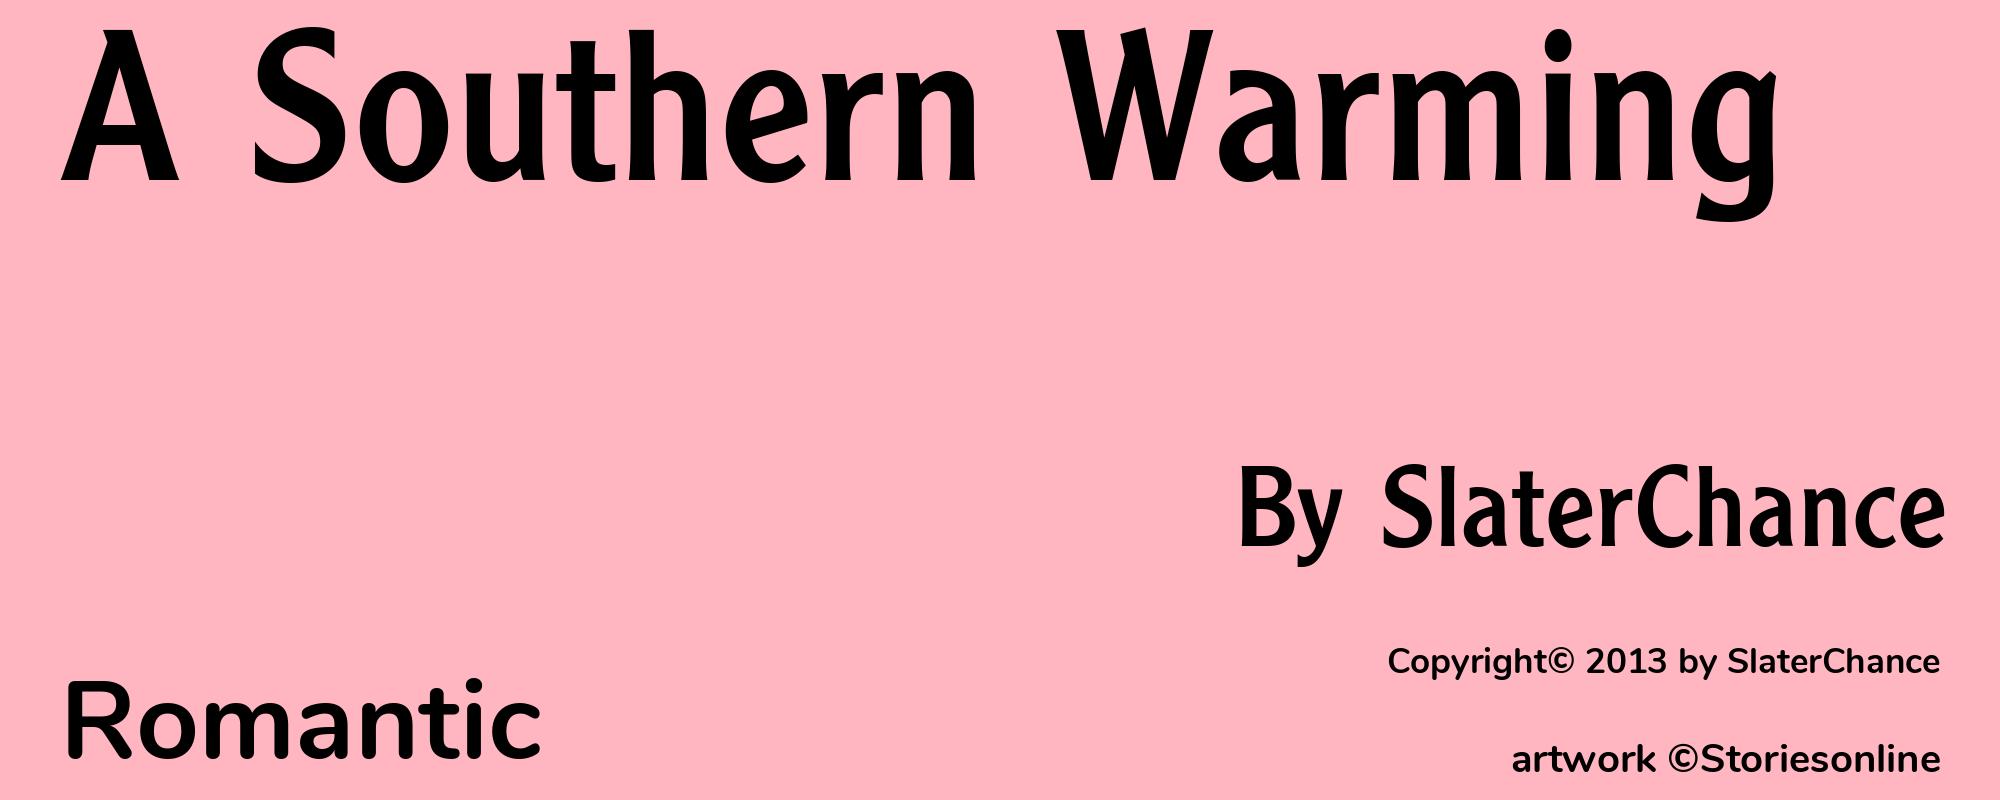 A Southern Warming - Cover